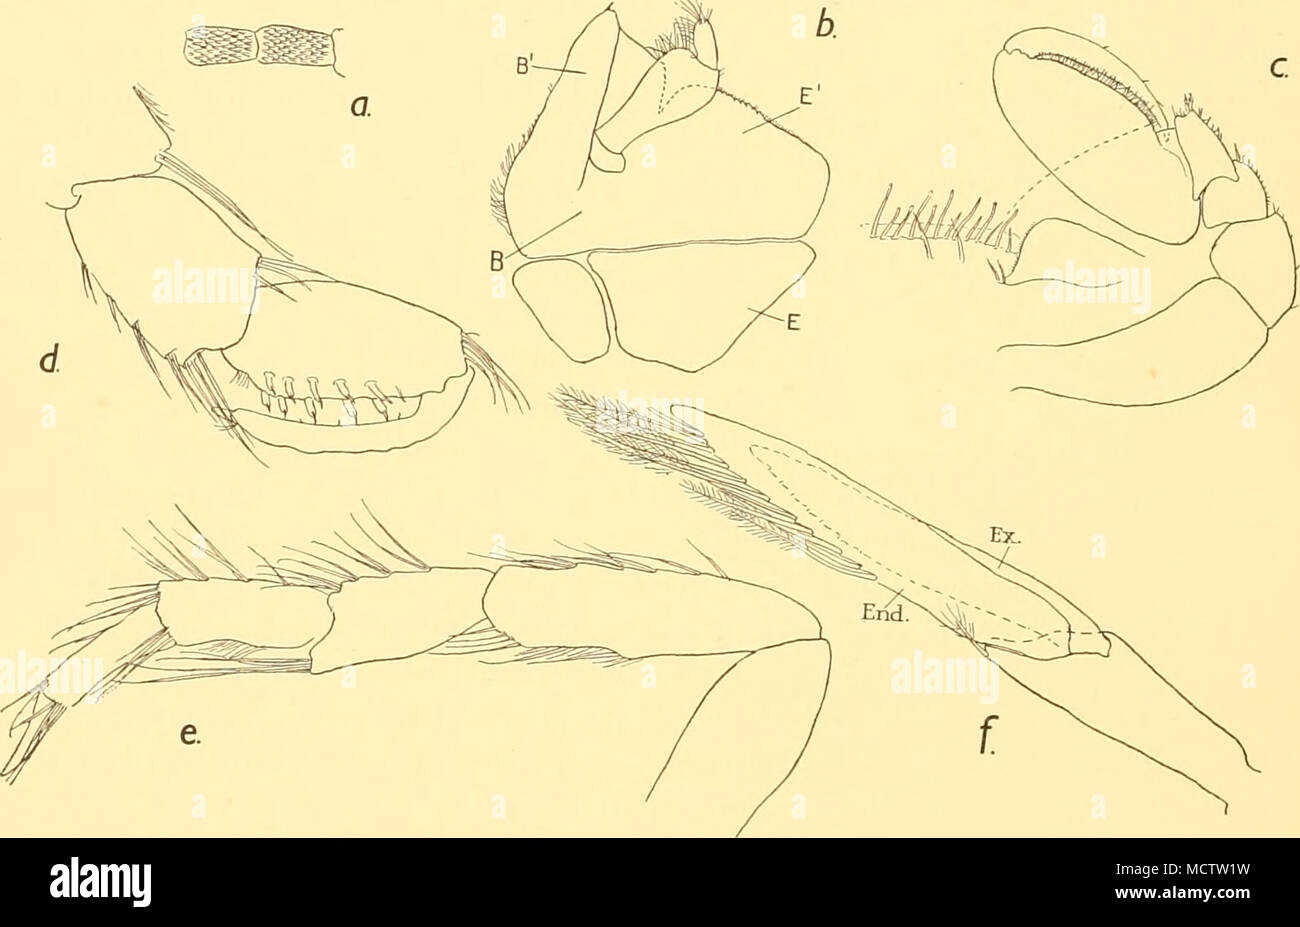 . Fig. 17. Serolis nototropis, n.sp. a, two joints of the antennal flagellum, to show the conical scales, b. maxilliped of ^: x 50. c, second thoracic appendage of (J: x 64. d, third thoracic appendage of (J: x 90. e, fourth thoracic appendage of (J: X 67. /, uropod: x 83. The type of maxilliped met with in this species (Fig. 17 6) is intermediate between that of S. exigua, Nordenstam, and that of S. schythei, LiJtken. The endopod springs from the middle of a plate-like structure consisting of the basipodite [B) plus its endite {B') and its lamella (£&quot;): distally the endite and the lamell Stock Photo